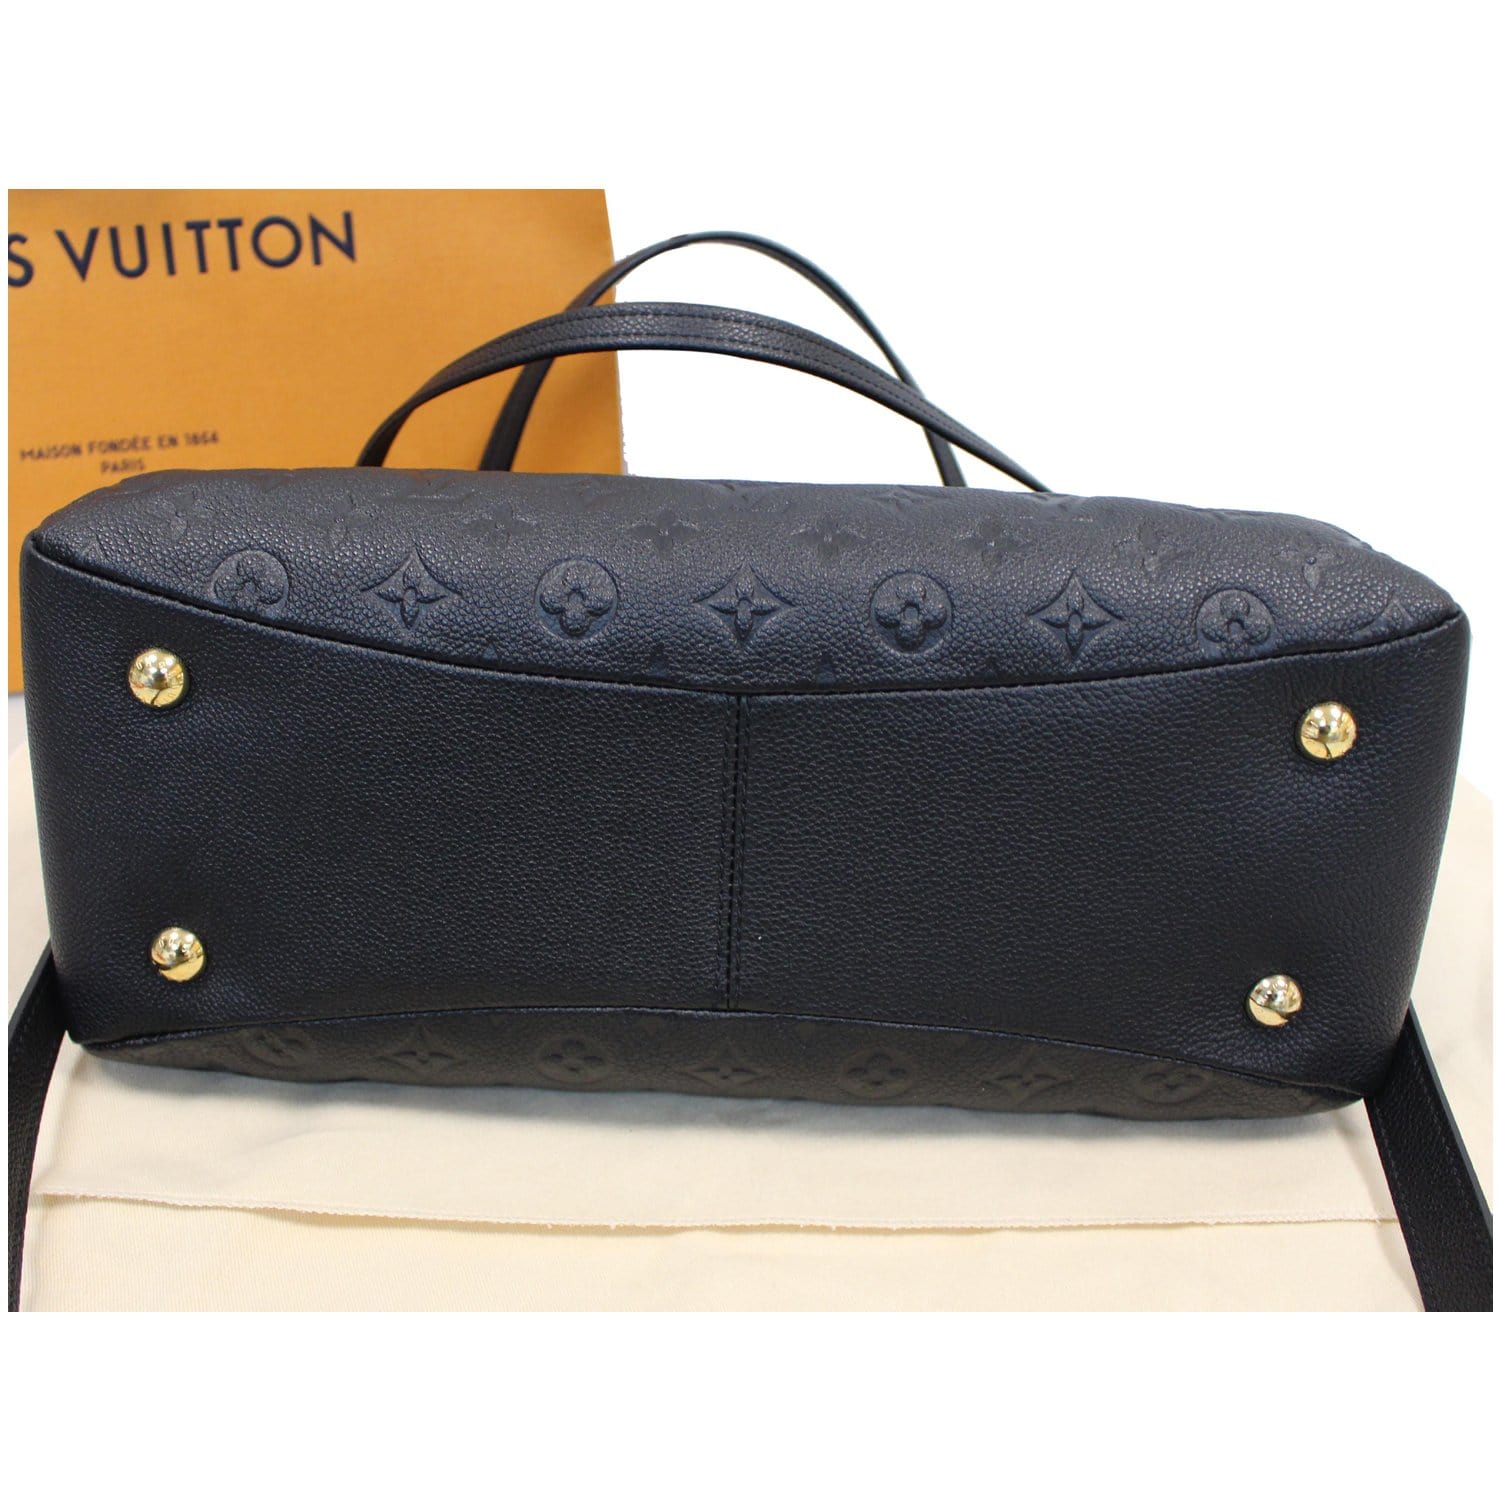 Louis Vuitton ponthieu pm for Sale in Livermore, CA - OfferUp